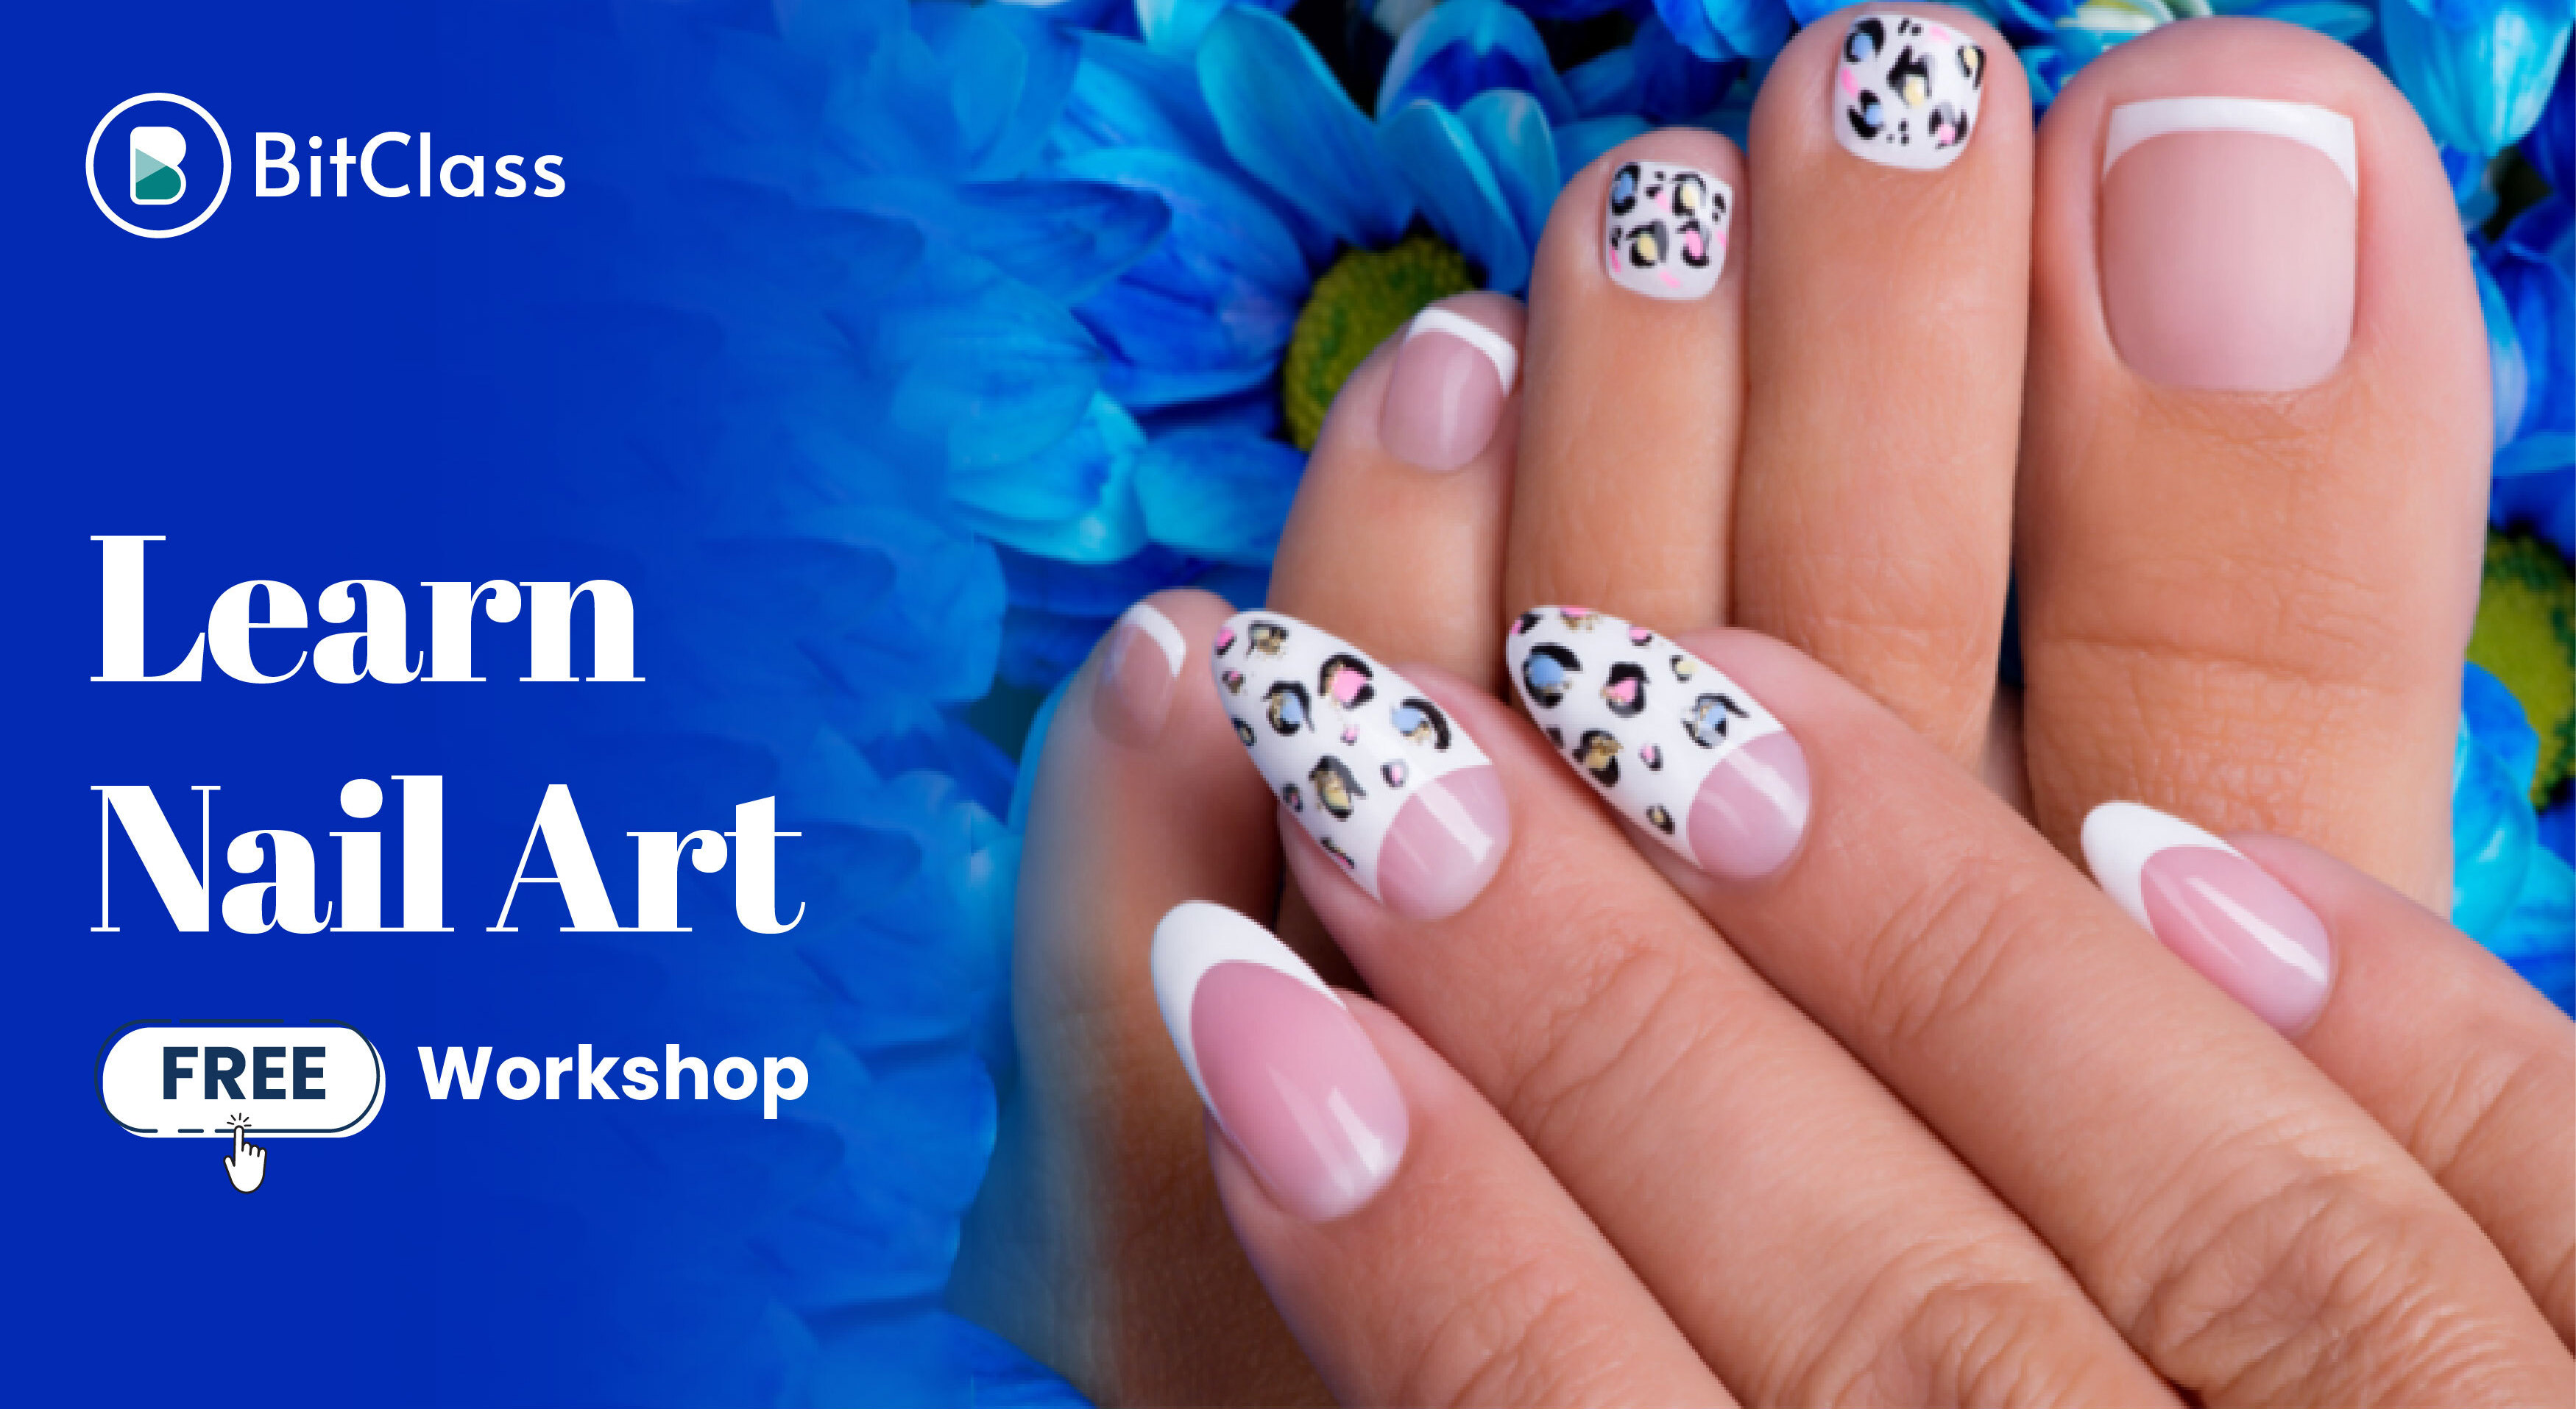 1. Nail Art Academy Canada
2. Nail Art Courses in Toronto
3. Nail Art Classes in Vancouver
4. Nail Art Training in Montreal
5. Nail Art Workshops in Calgary
6. Nail Art Certification in Ottawa
7. Nail Art Programs in Edmonton
8. Nail Art Courses Online in Canada
9. Nail Art Schools in Quebec
10. Nail Art Diploma in Winnipeg - wide 5